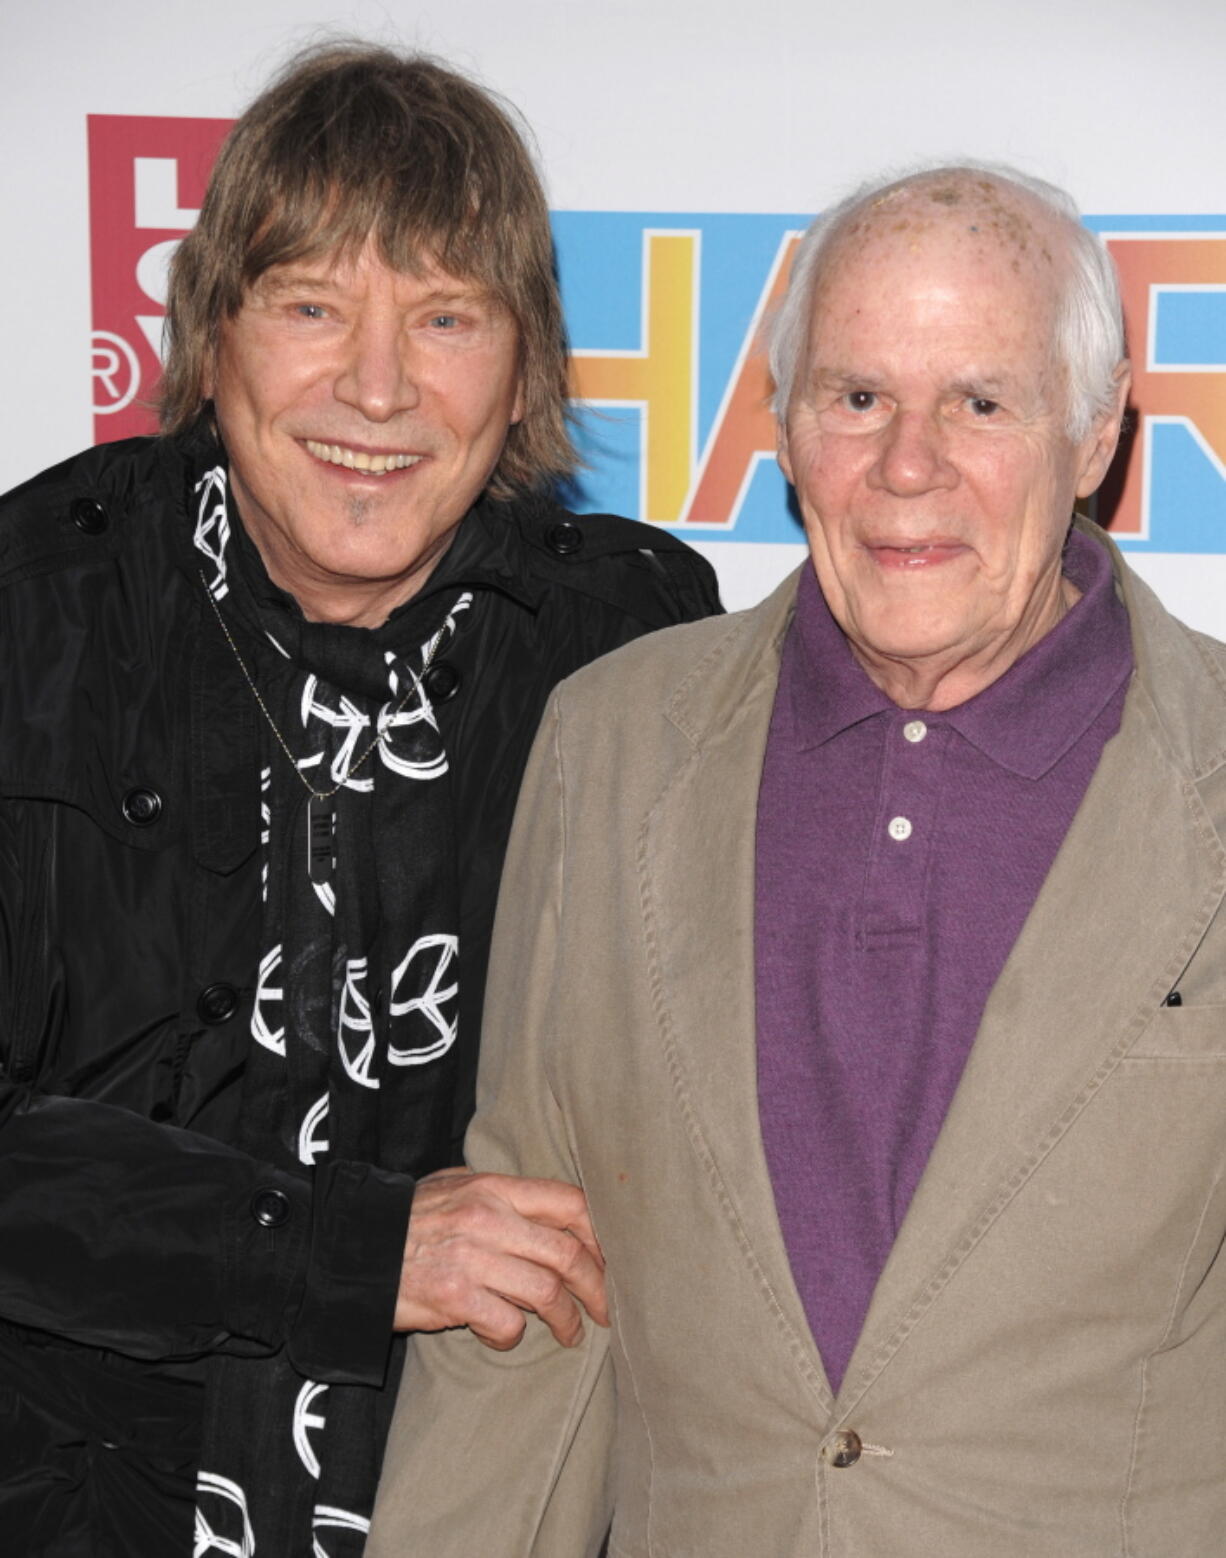 FILE - Creators of the "Hair" James Rado, left, and Galt MacDermot attend the opening night of the Broadway musical "Hair", in New York, on  March 31, 2009. Rado died Tuesday night, June 21, 2022 in New York of cardio respiratory arrest, according to friend and publicist Merle Frimark. He was 90.